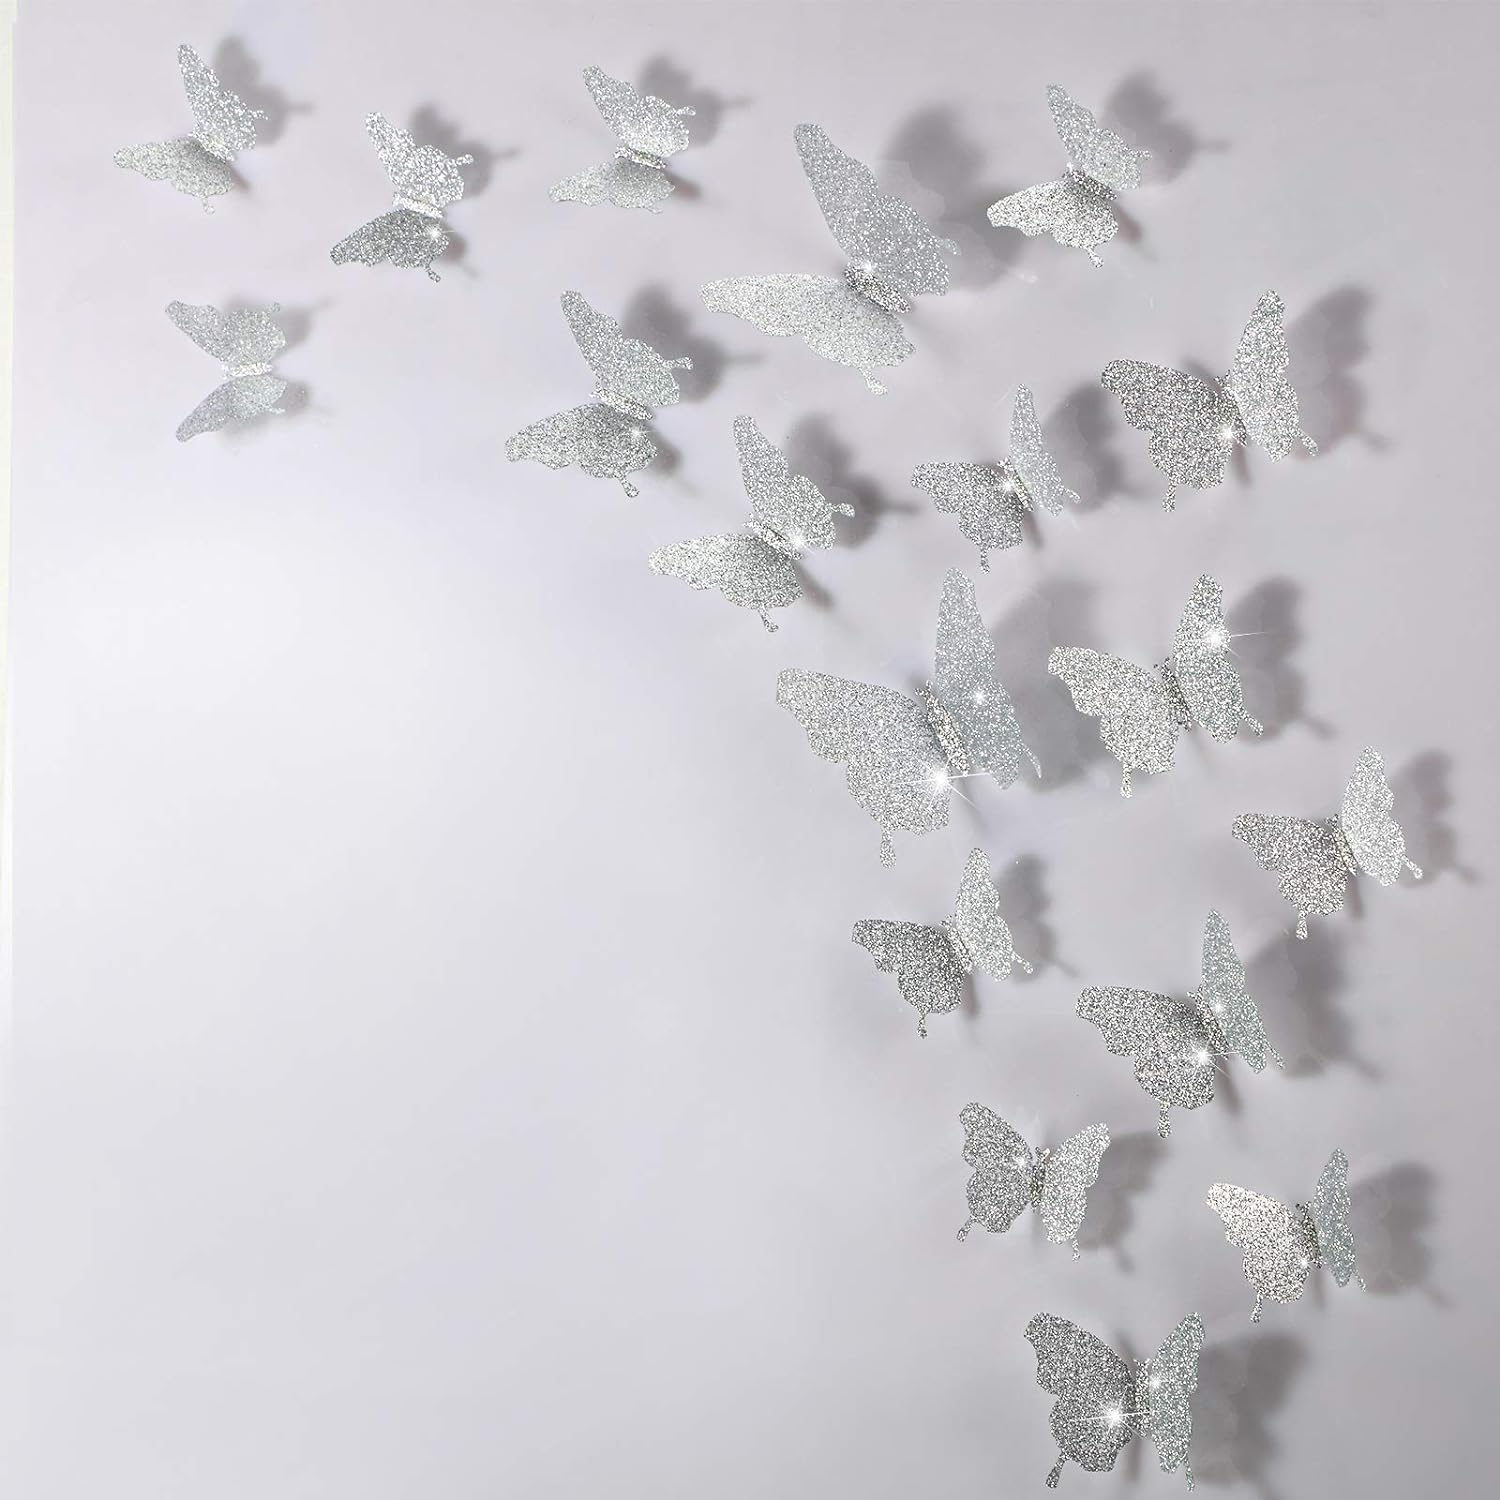 48 Pieces Butterfly Wall Decor DIY Mirror 3D Butterfly Stickers Removable Butterfly Decals for Home Nursery Classroom Kids Bedroom Bathroom Living Room Decor (Glitter Silver)